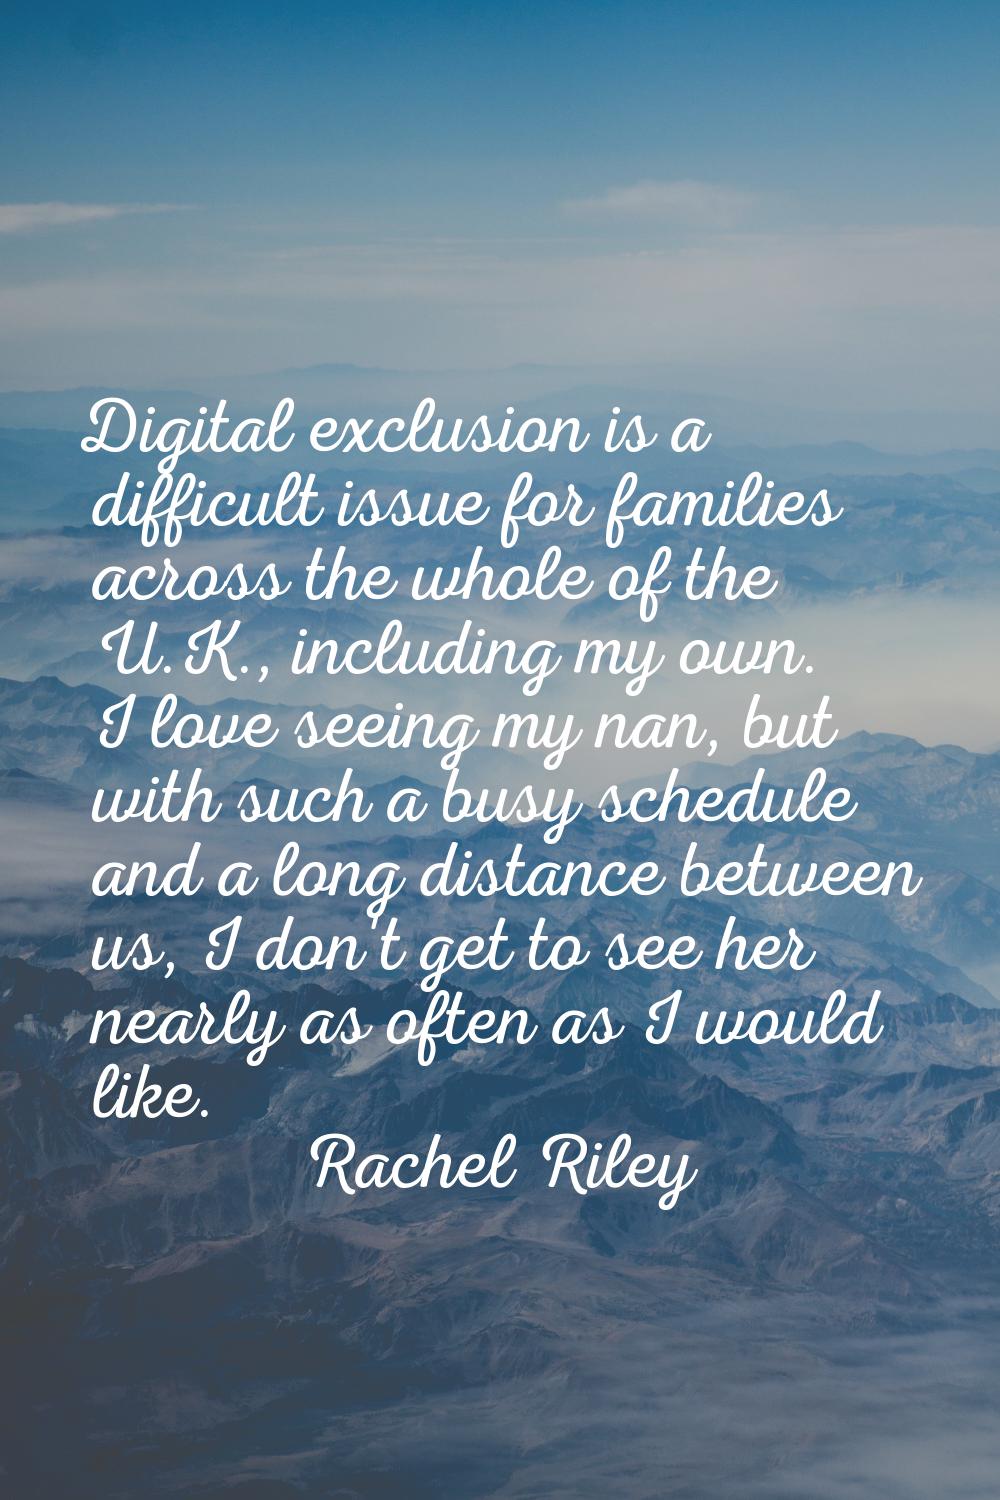 Digital exclusion is a difficult issue for families across the whole of the U.K., including my own.